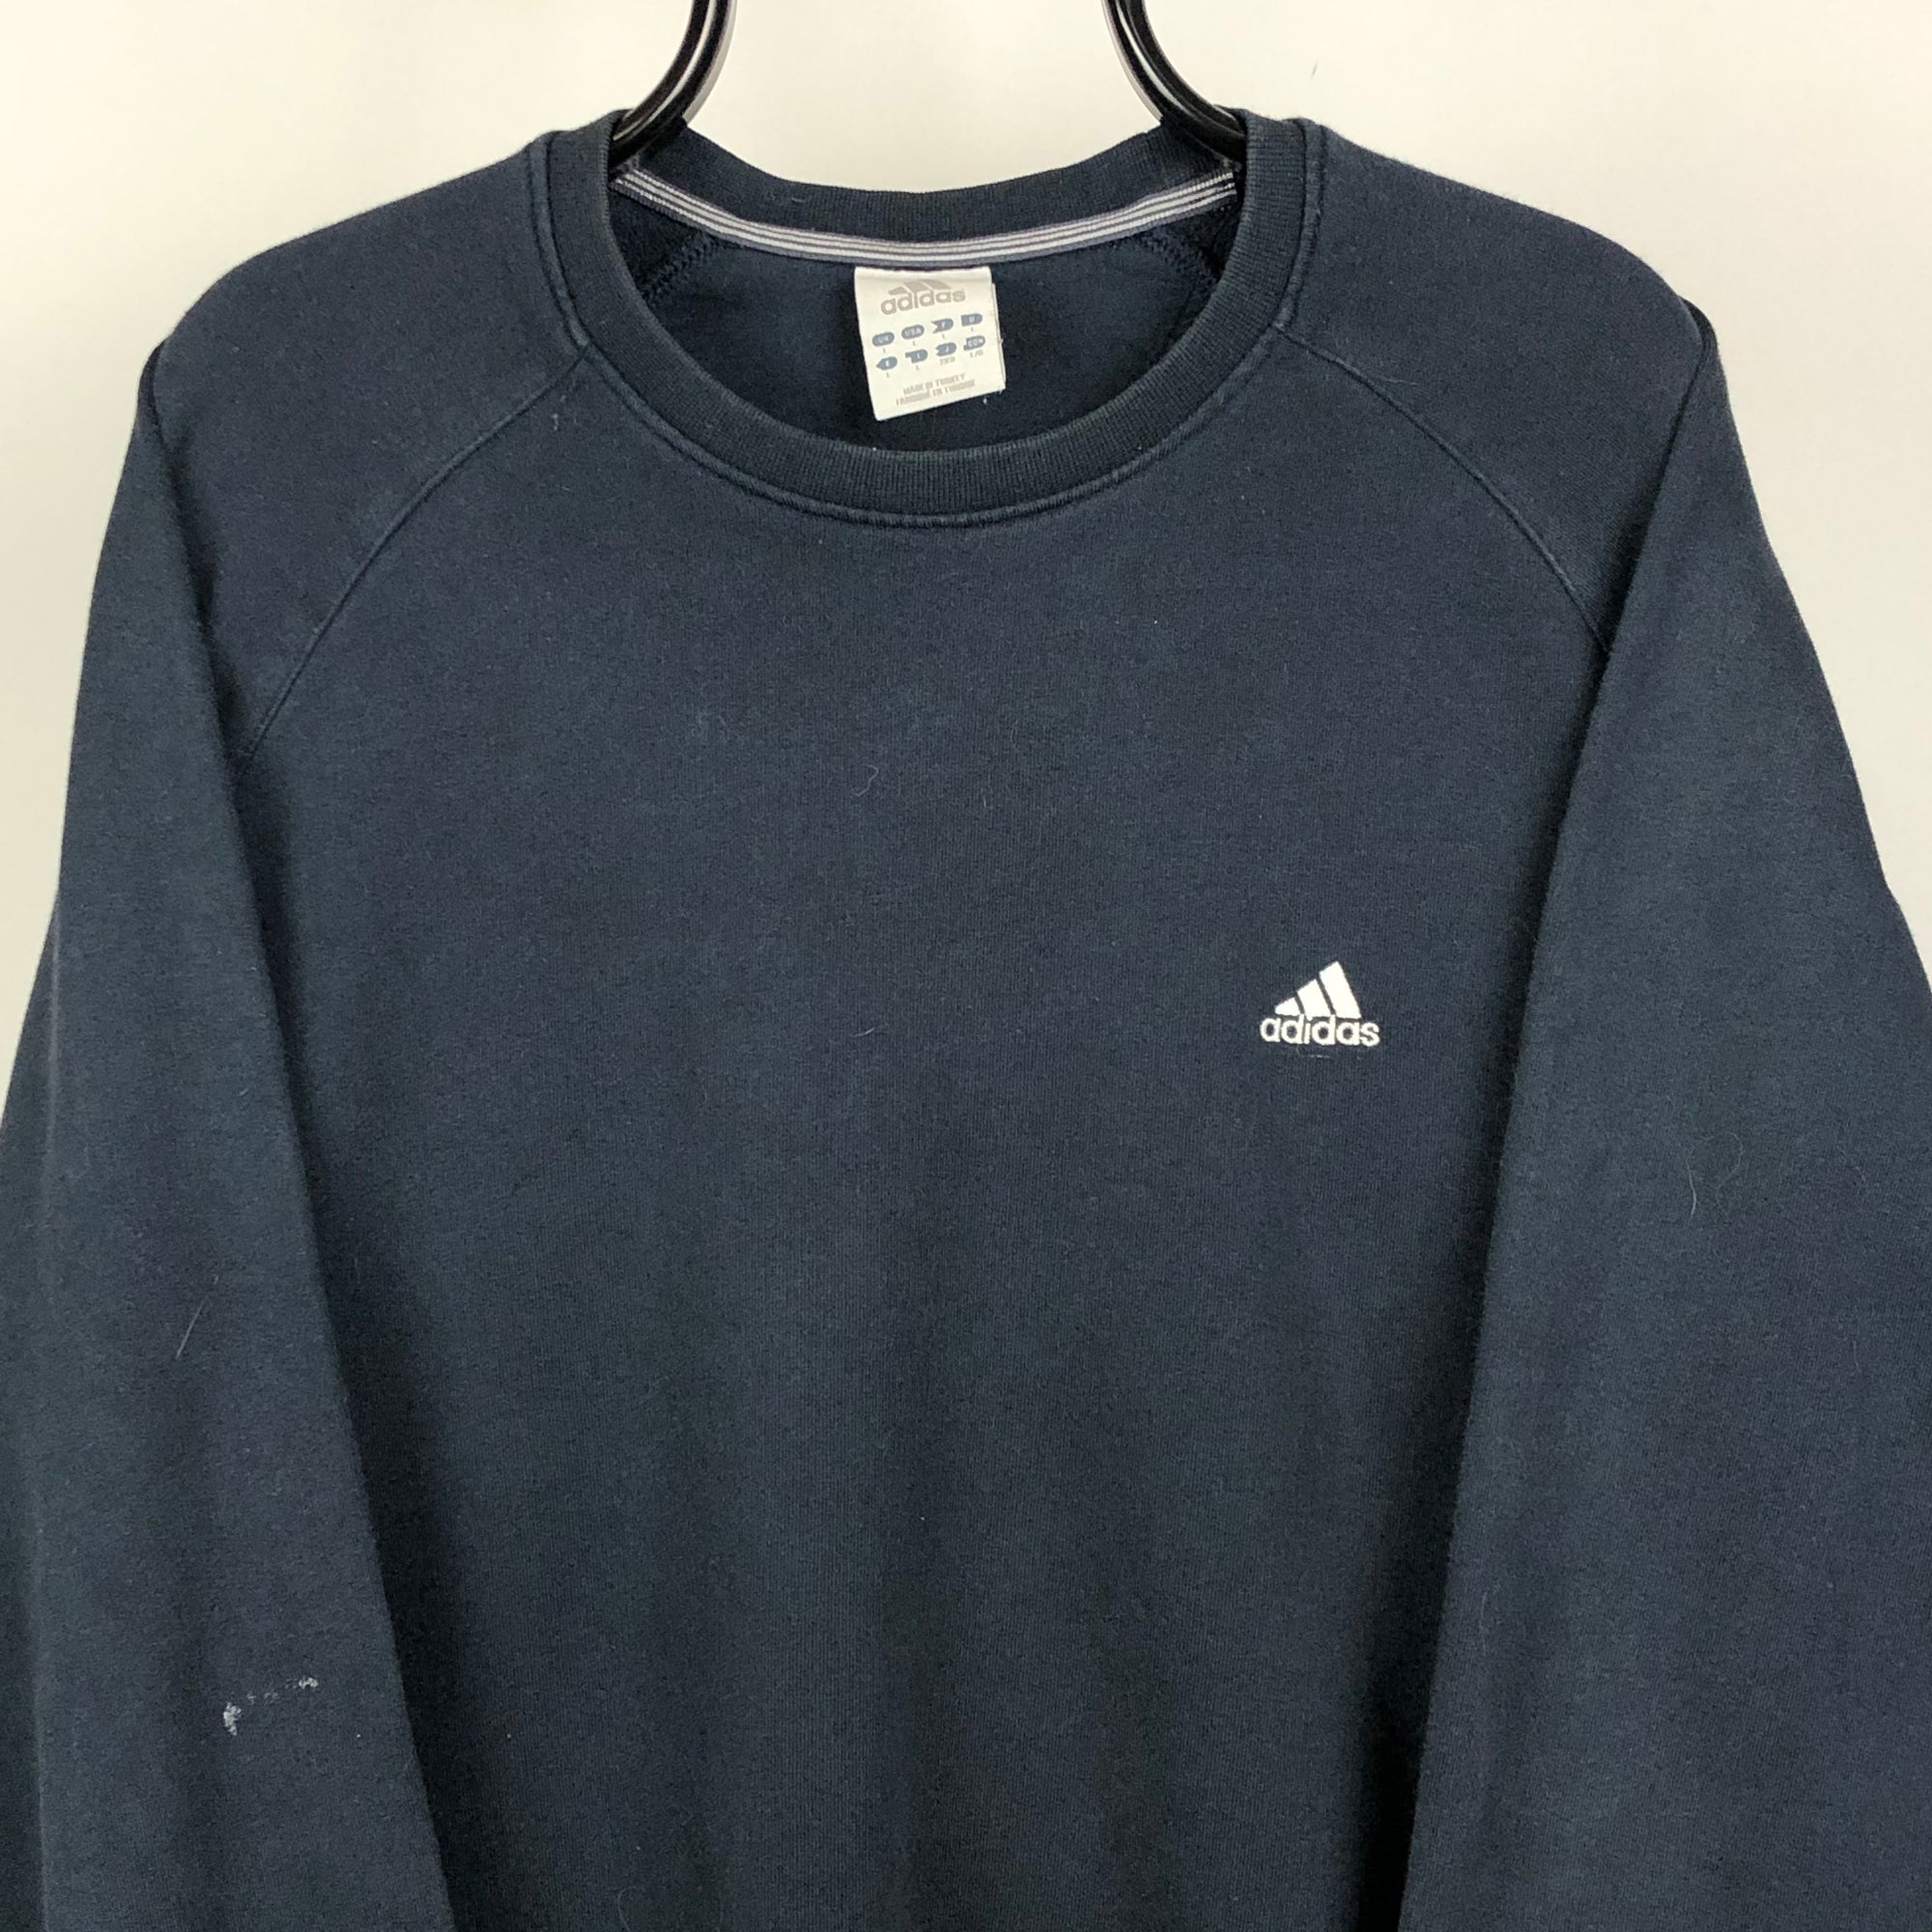 Adidas Embroidered Small Logo Sweatshirt in Navy - Men's Large/Women's XL